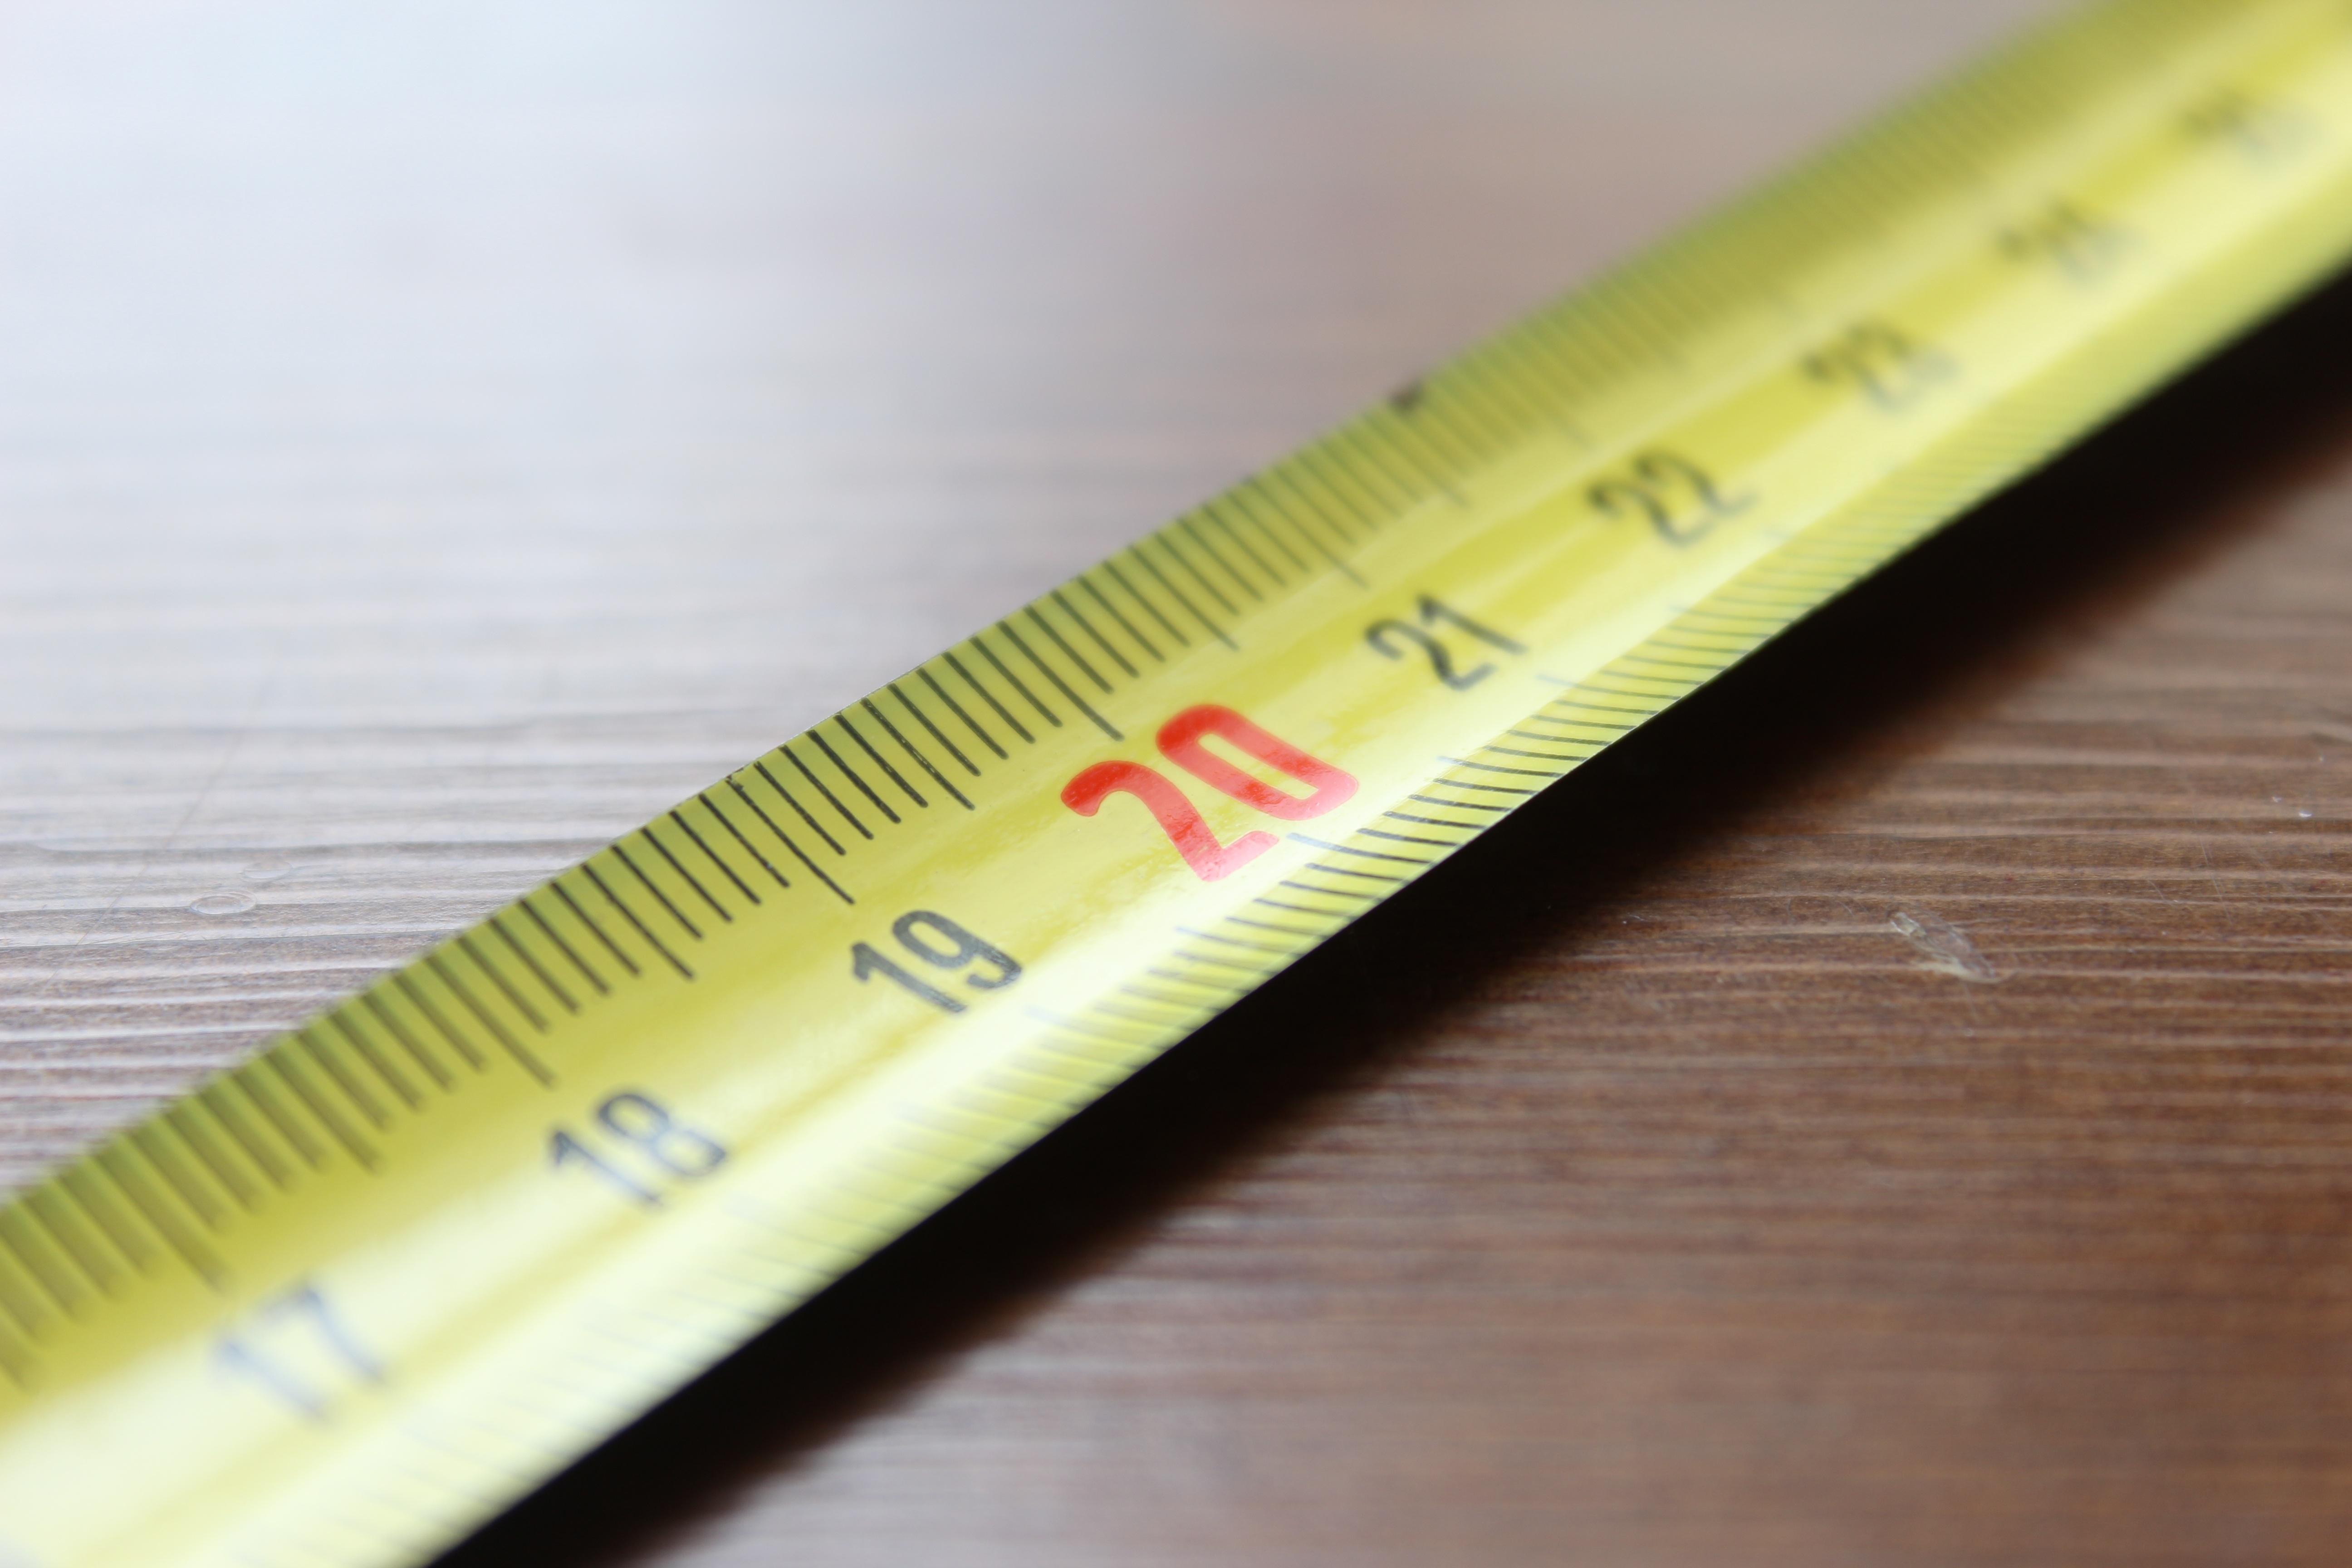 Determining how conference proposals measure up. (Pexels)